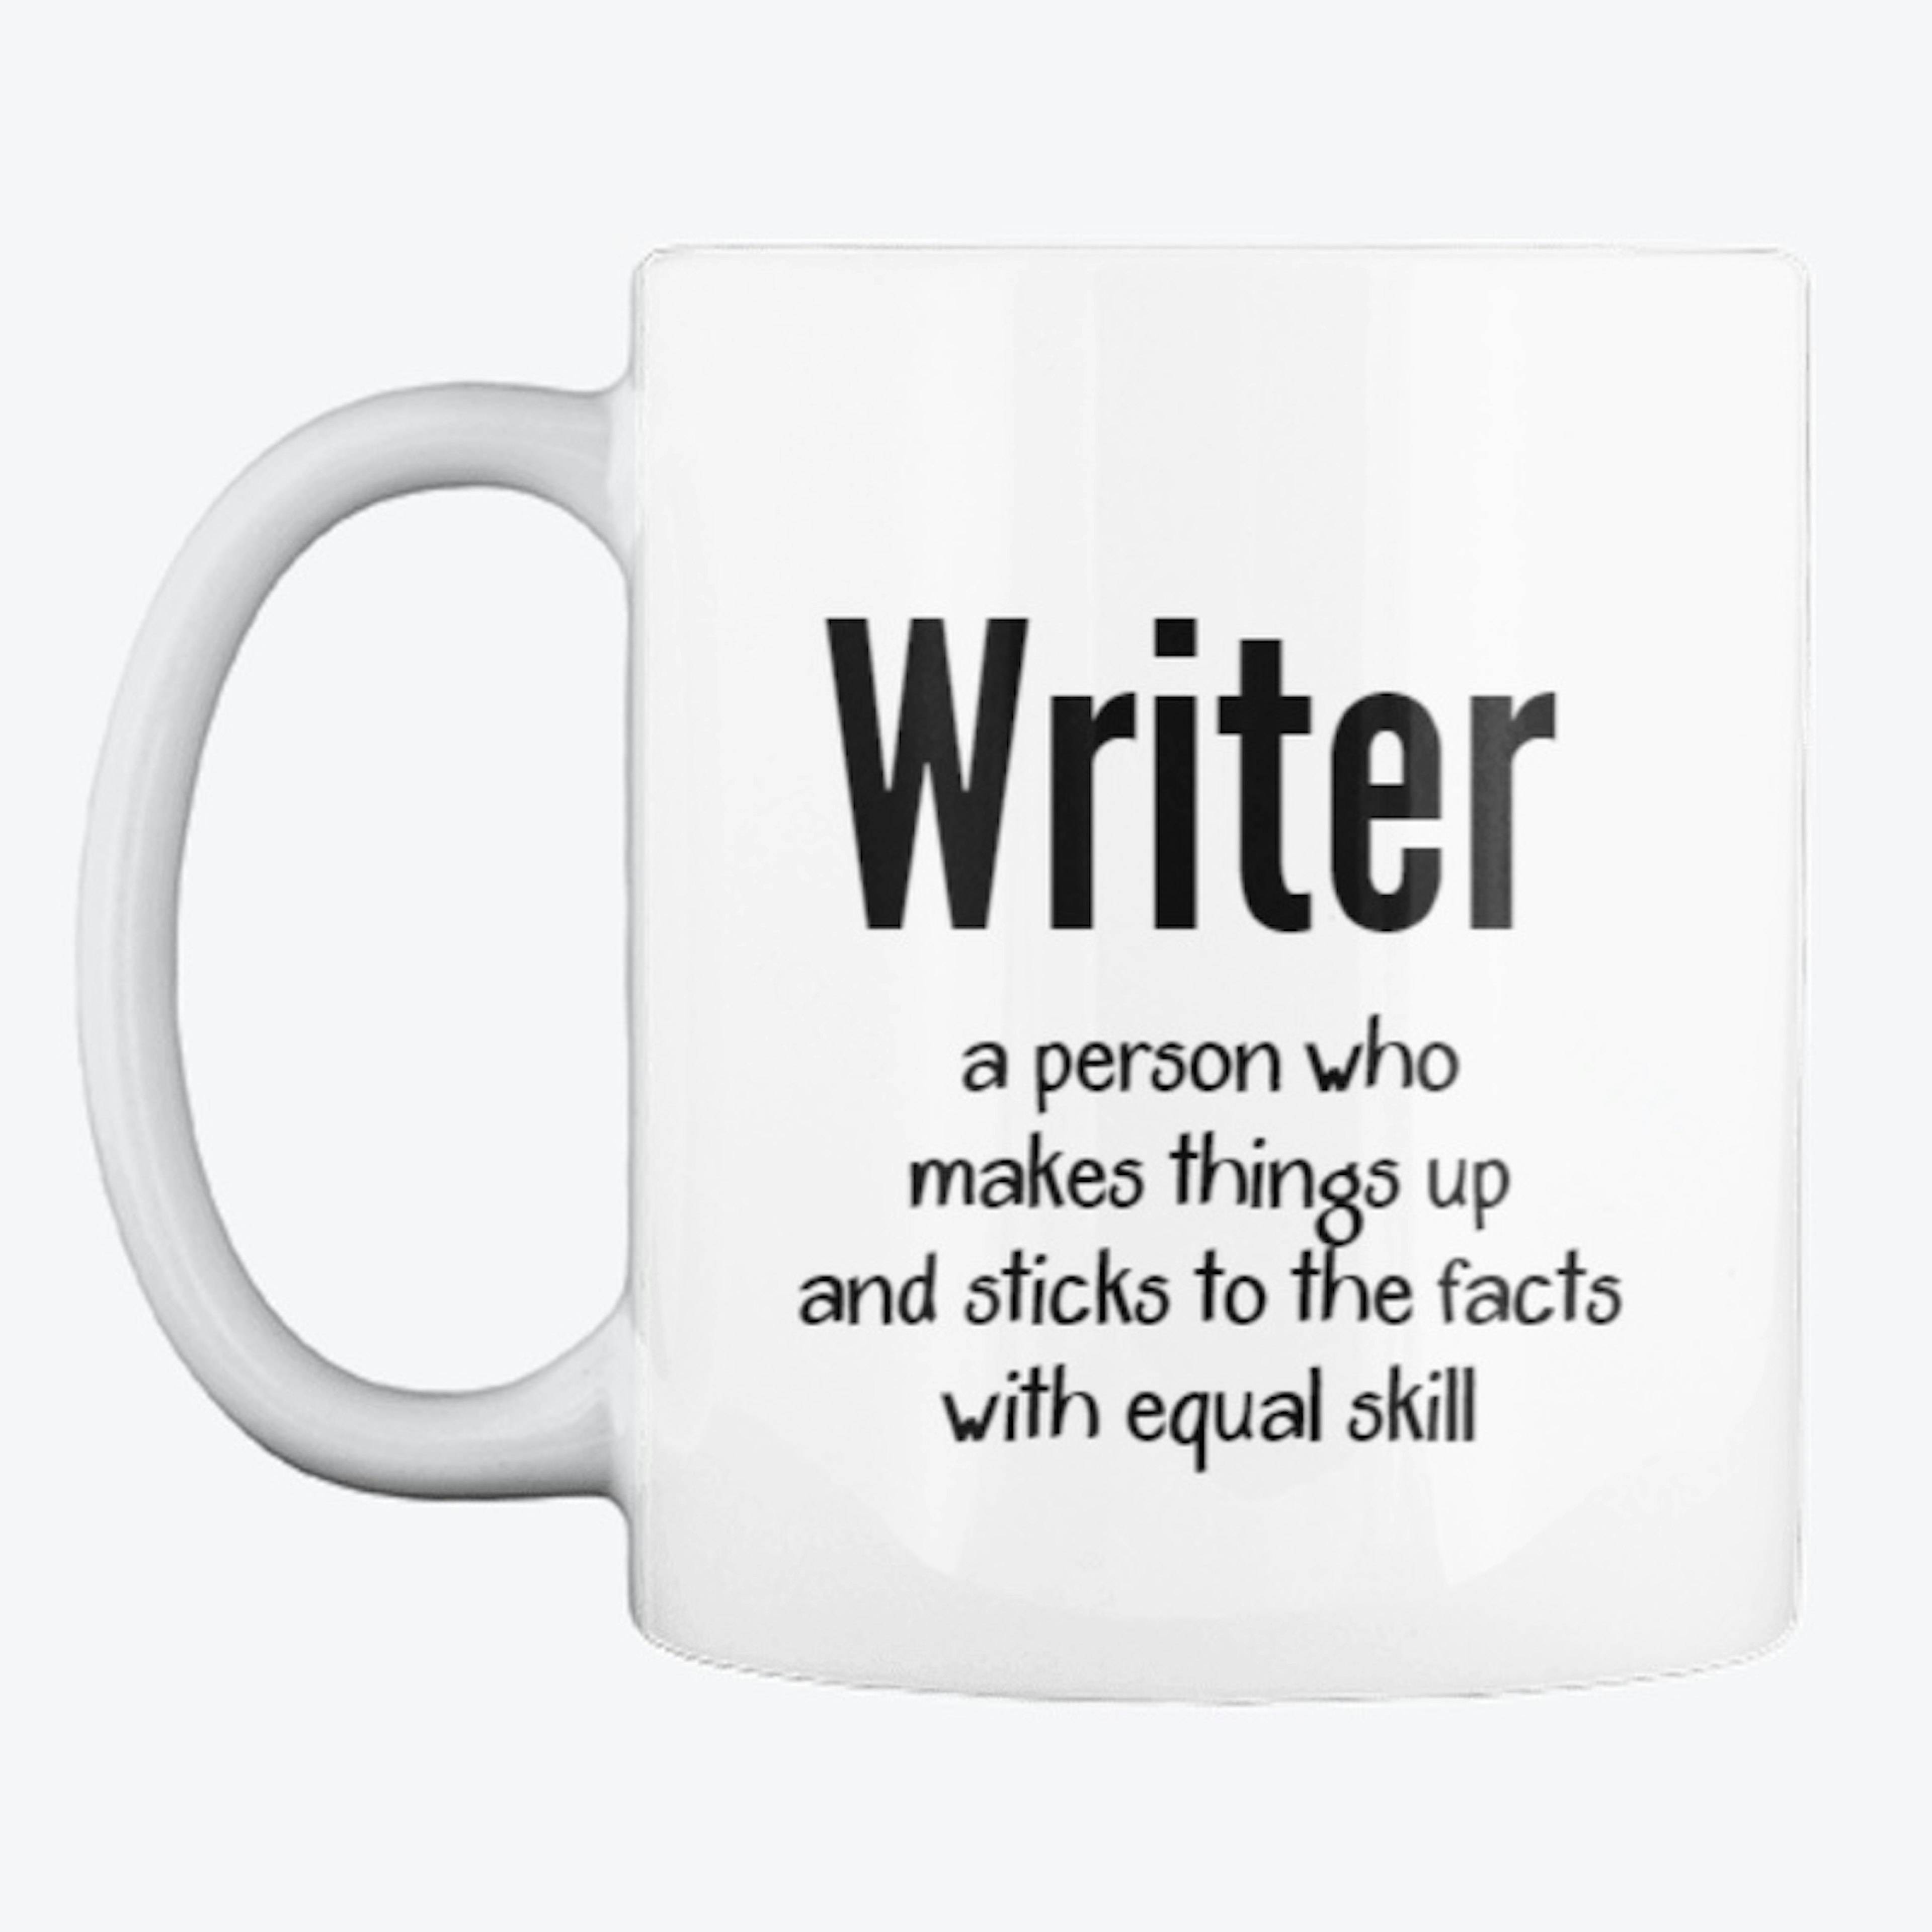 Writer Cup